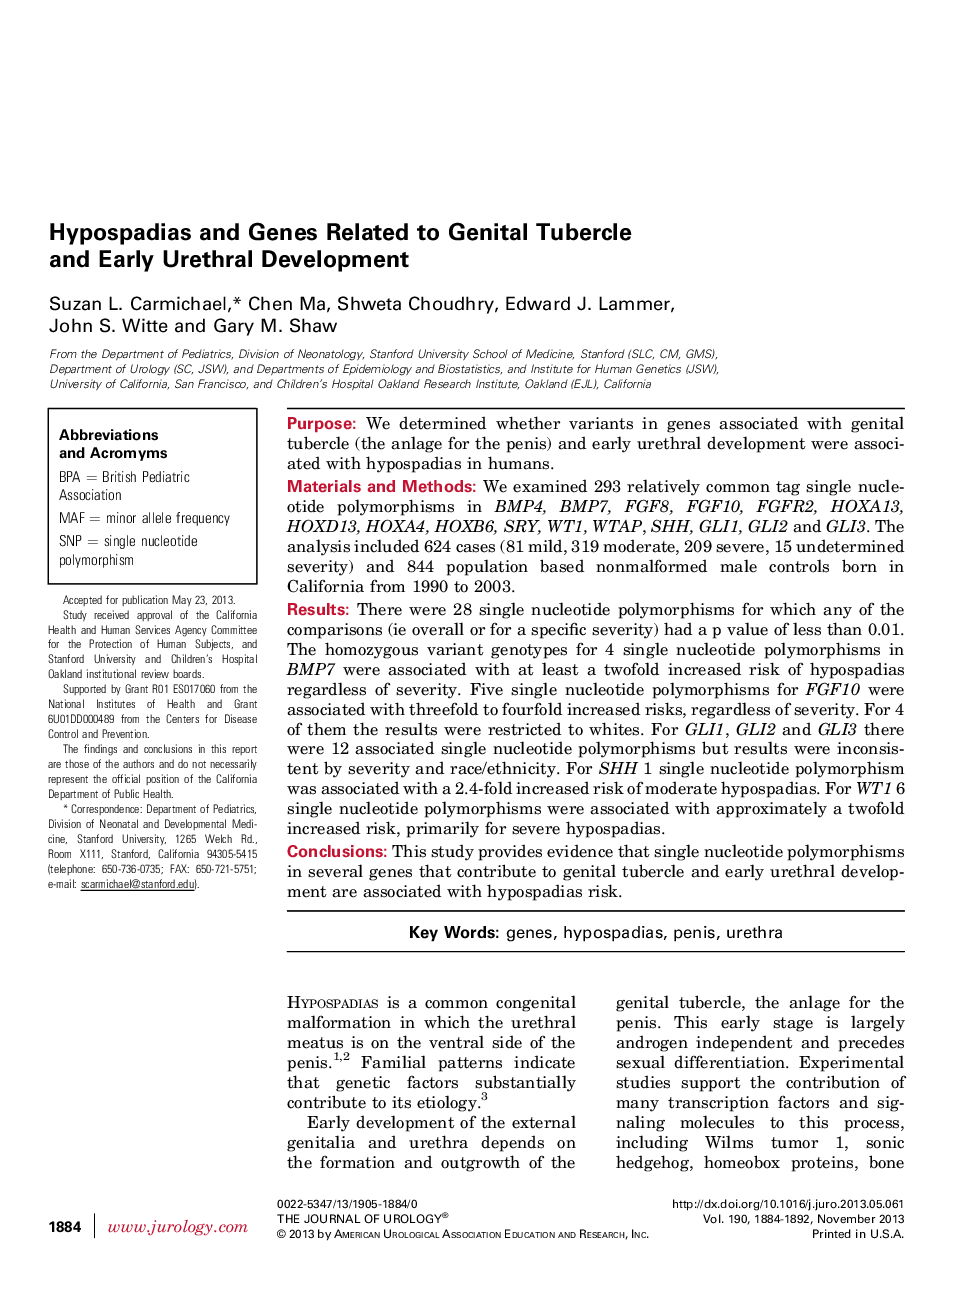 Hypospadias and Genes Related to Genital Tubercle and Early Urethral Development 